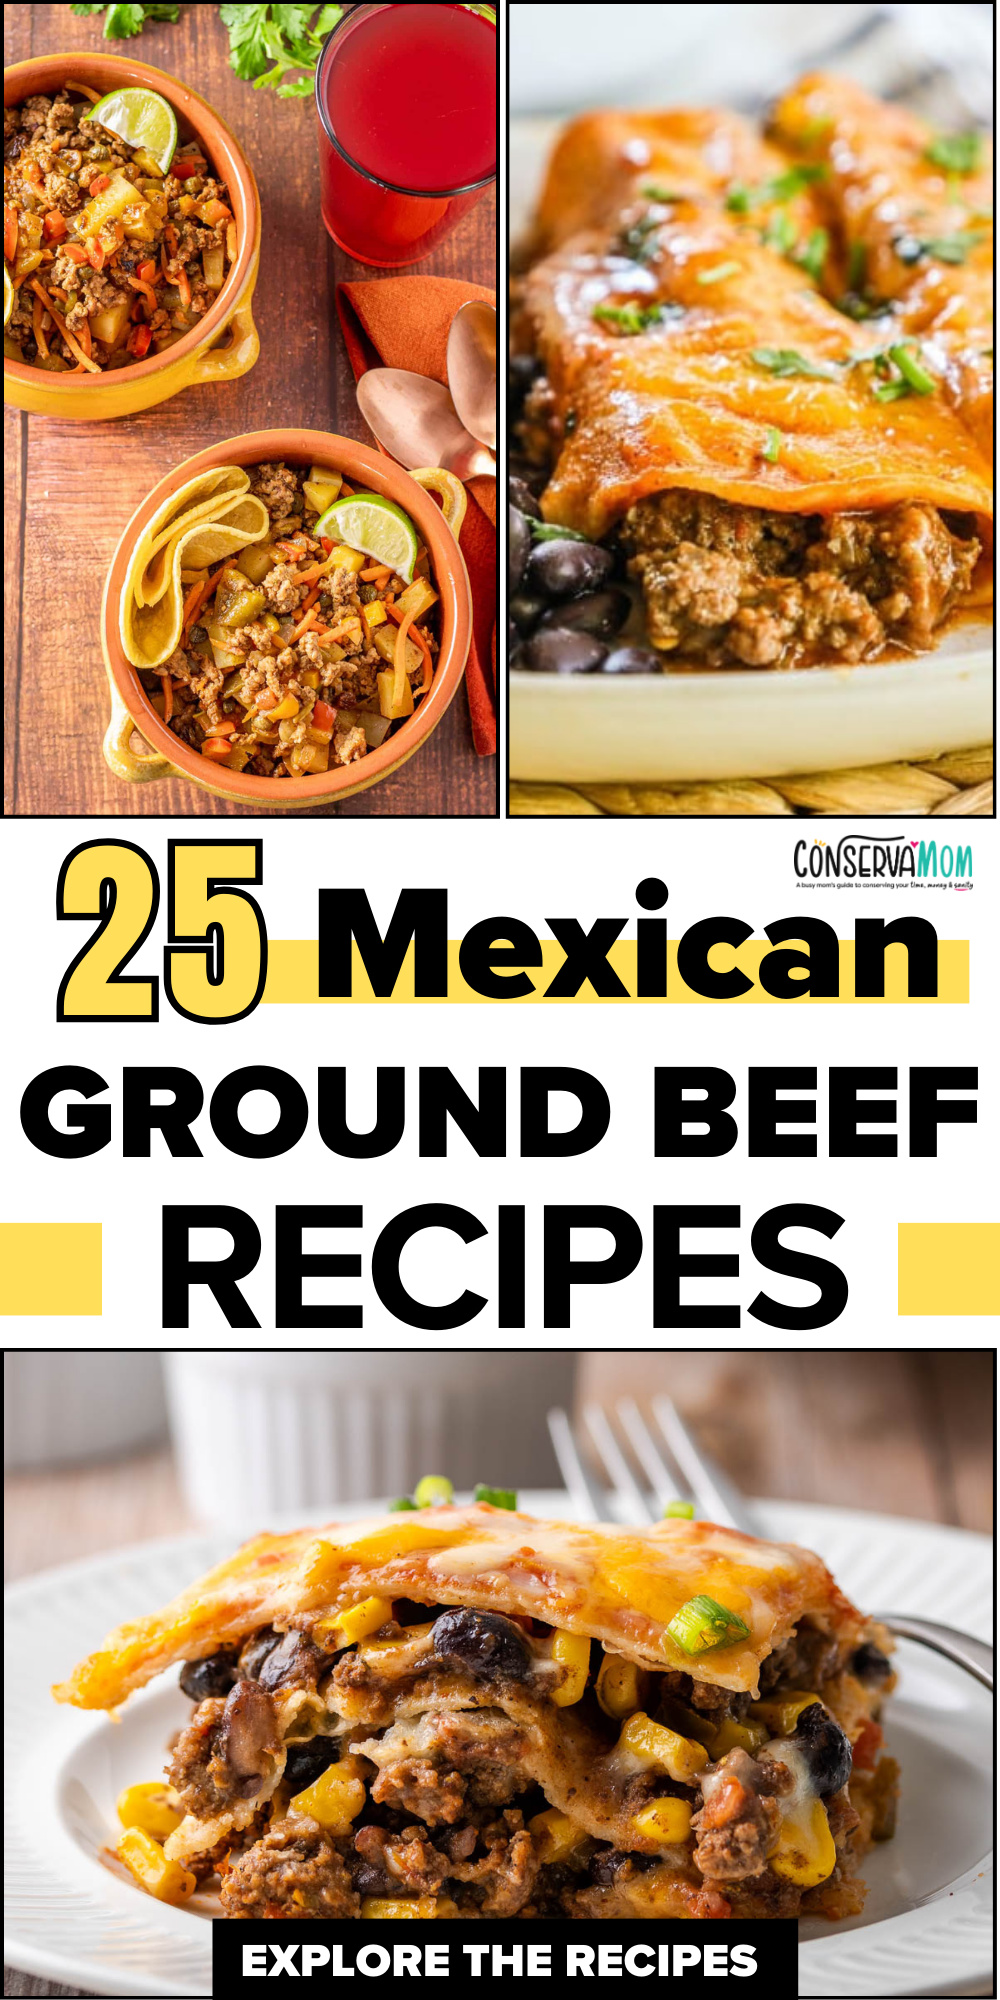 25 Mexican ground beef recipes